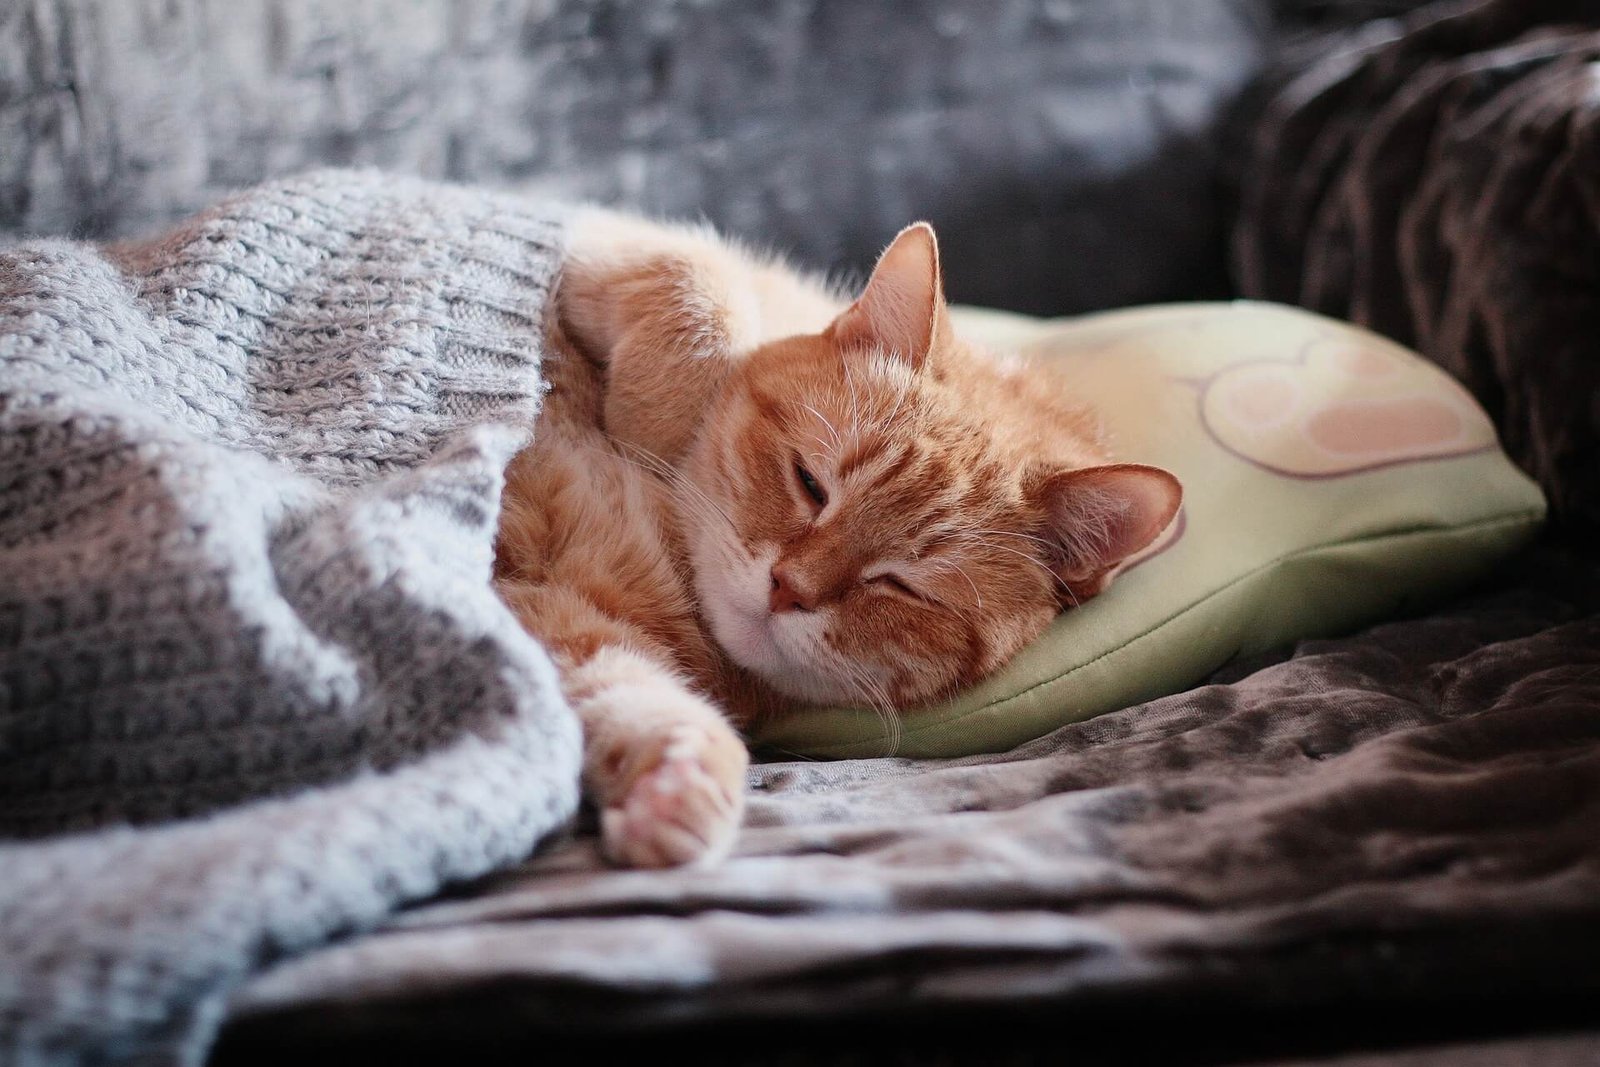 Give your kitten a warm blanket and cozy bed